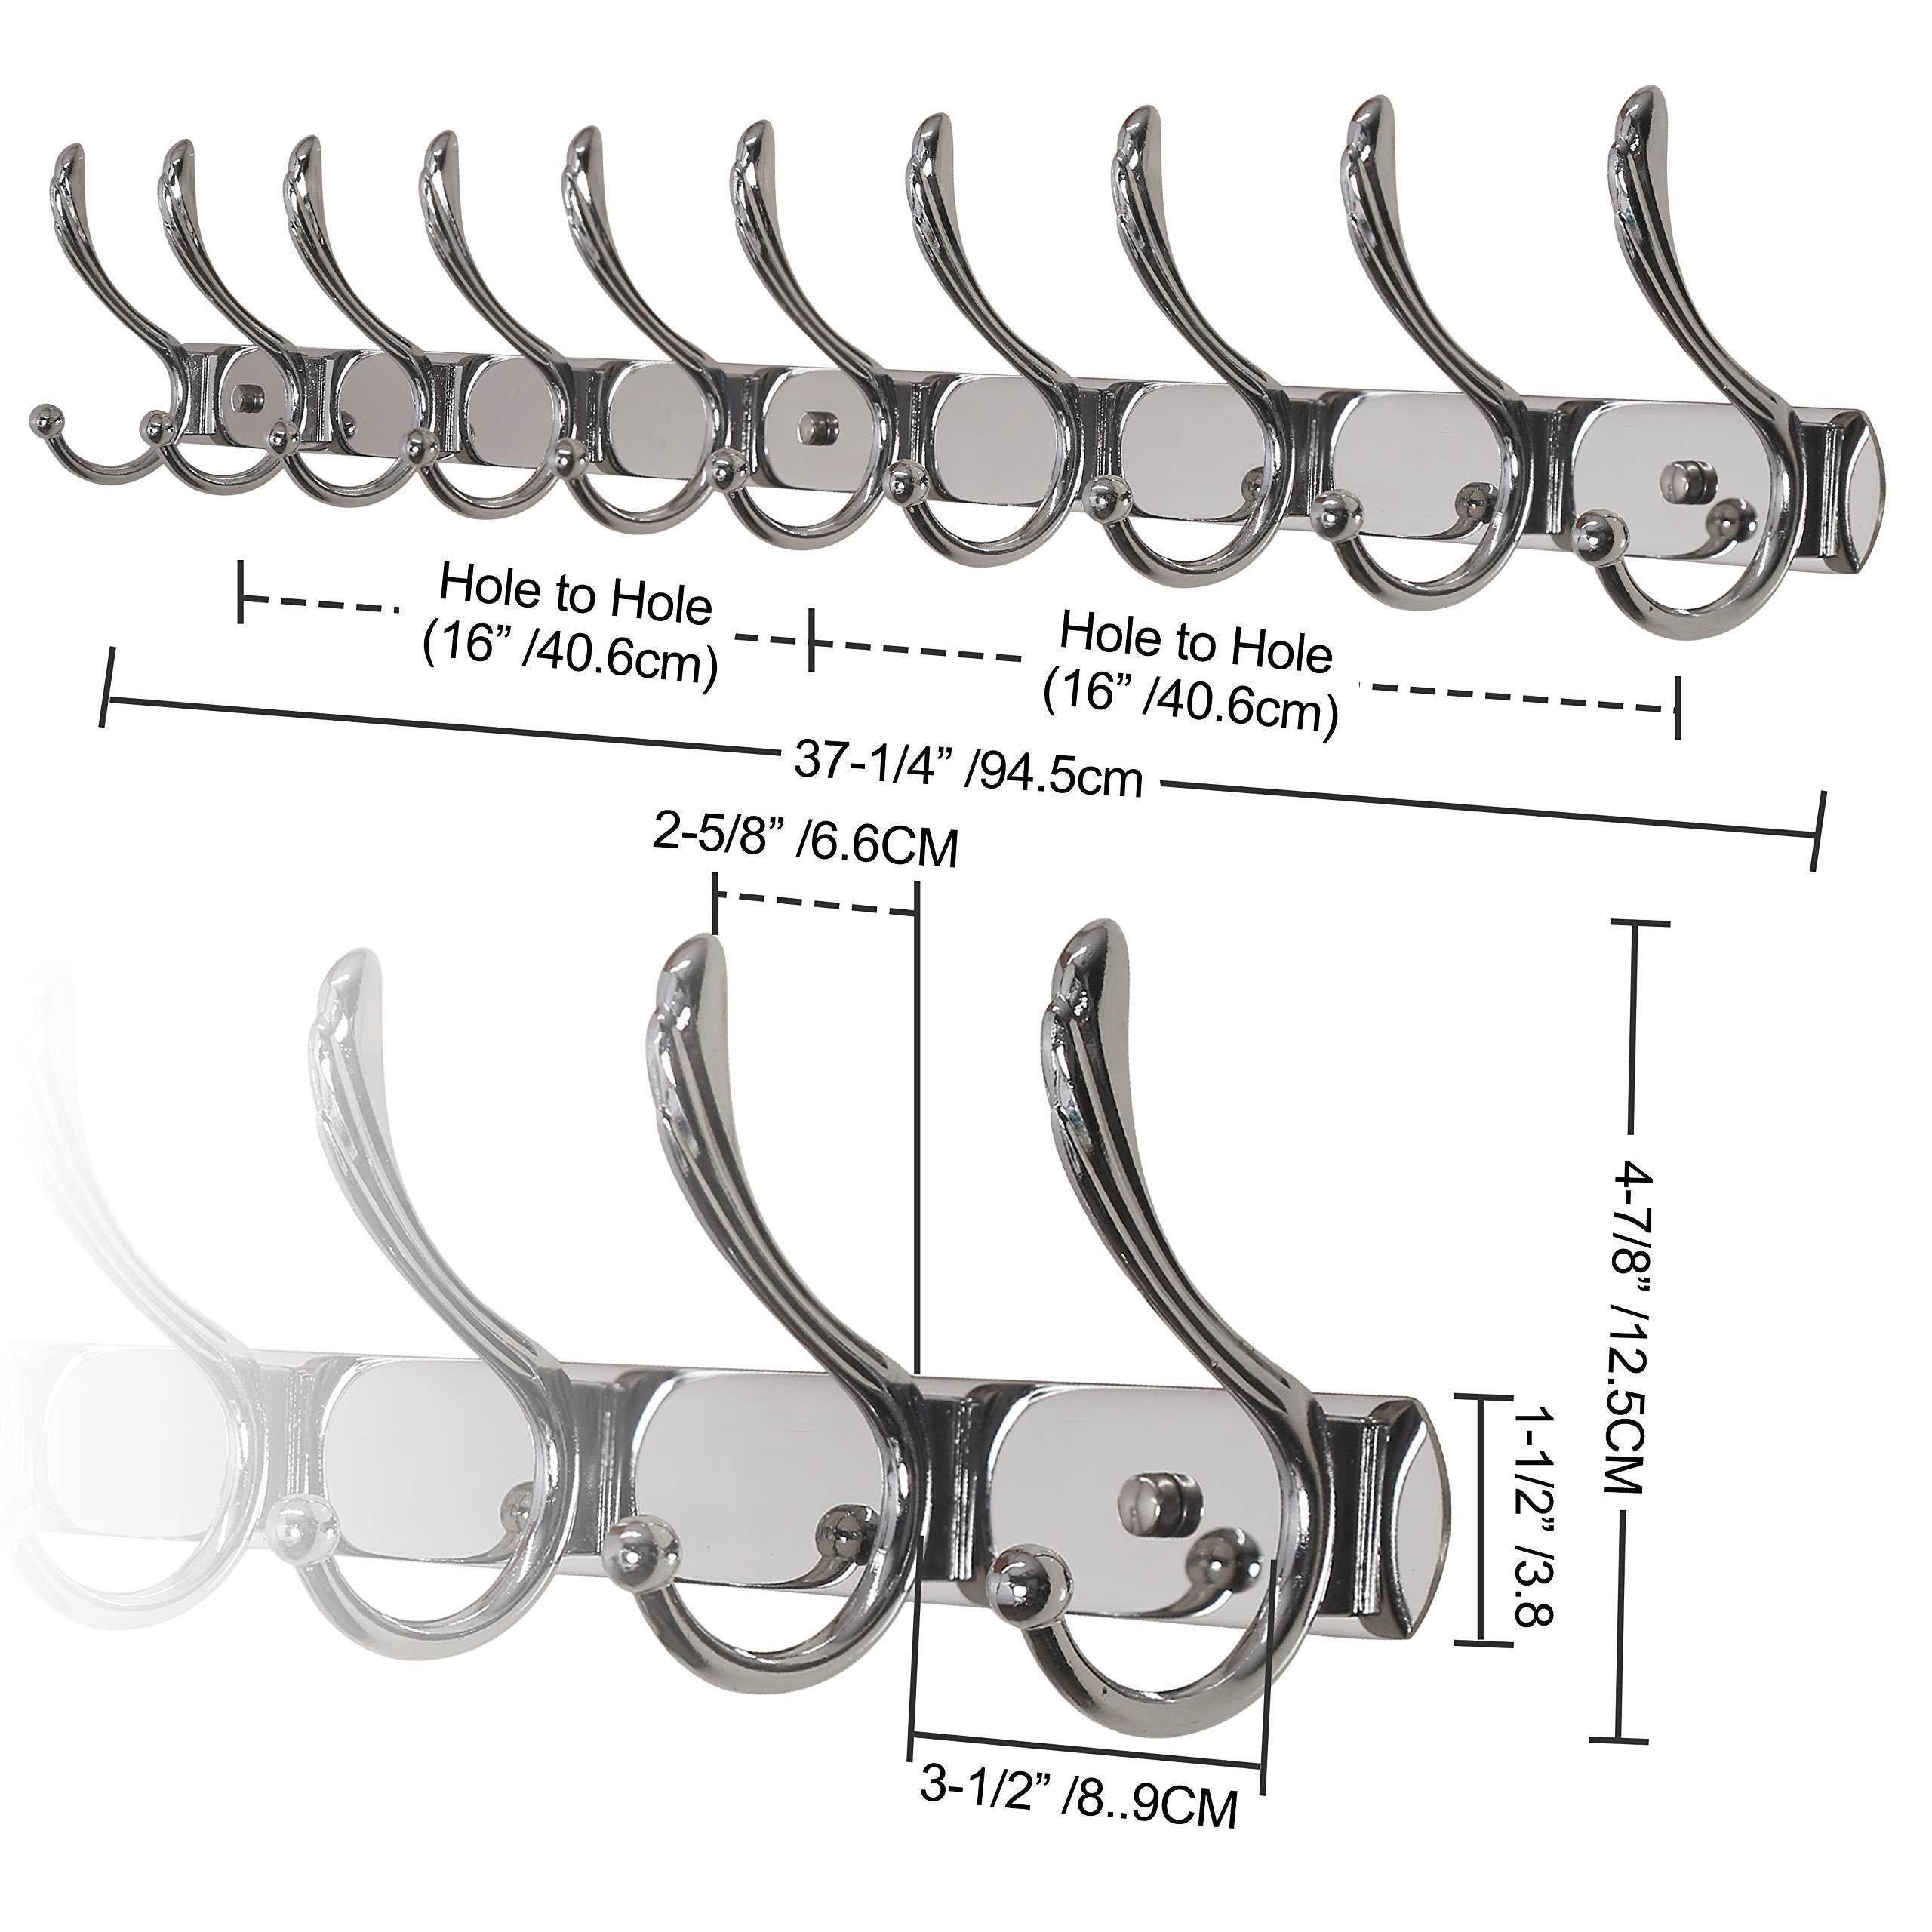 Save dseap wall mounted coat rack 10 hooks heavy duty stainless steel metal coat hook for clothes towel hat robes mudroom bathroom entryway cock tail chromed 2 packs